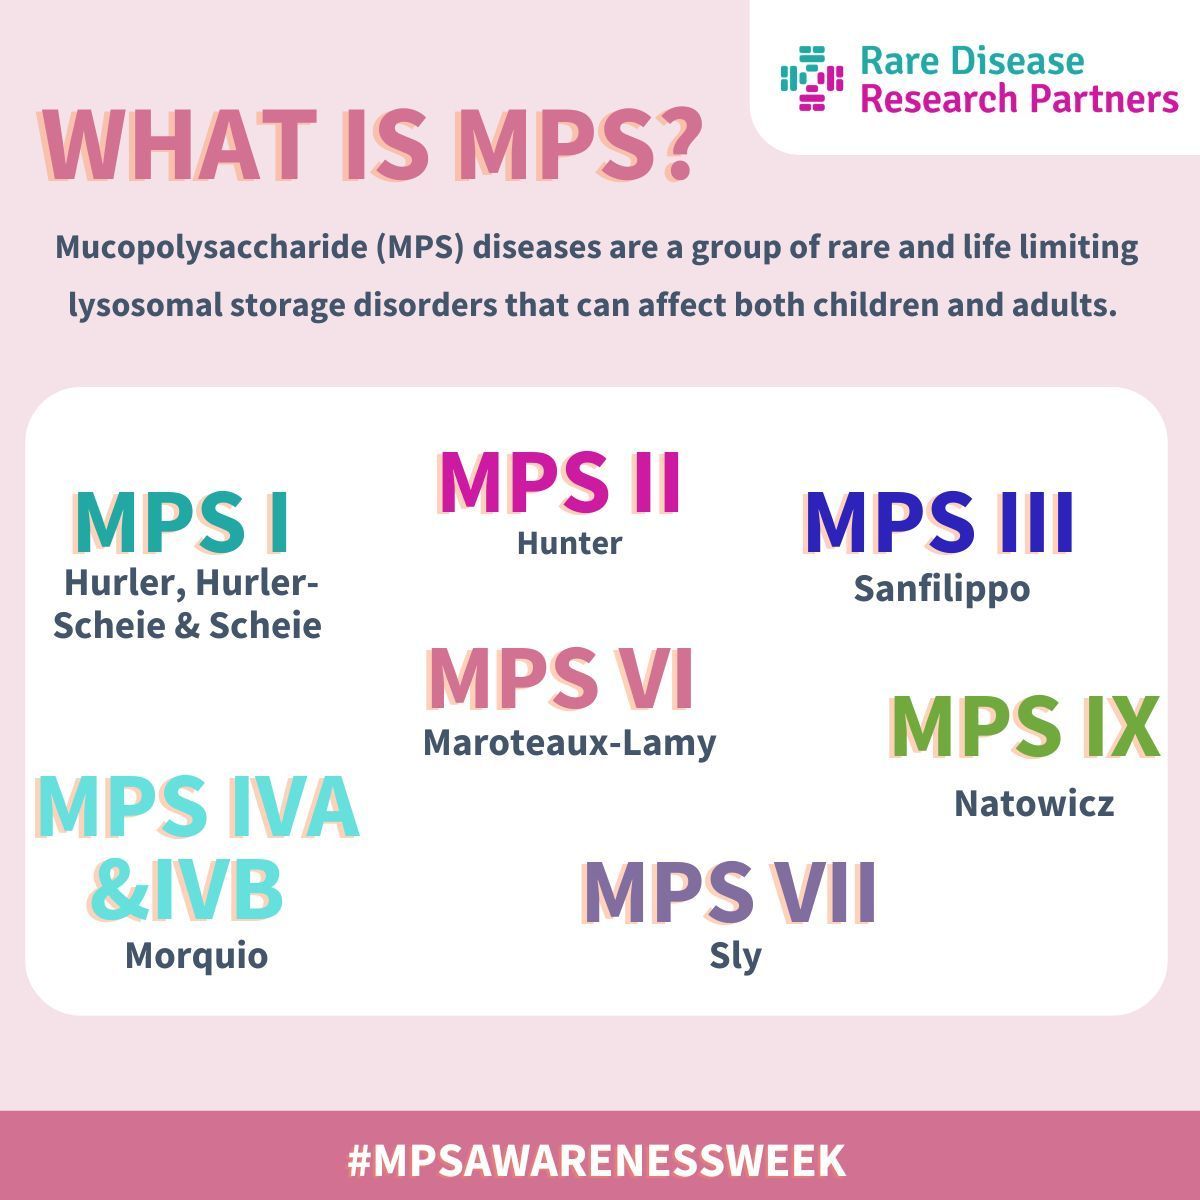 This week, in light of #MPSAwarenessWeek, we will be raising awareness of the impact and challenges faced by those living with MPS. Learn more at mpssociety.org.uk #research #rarediseases